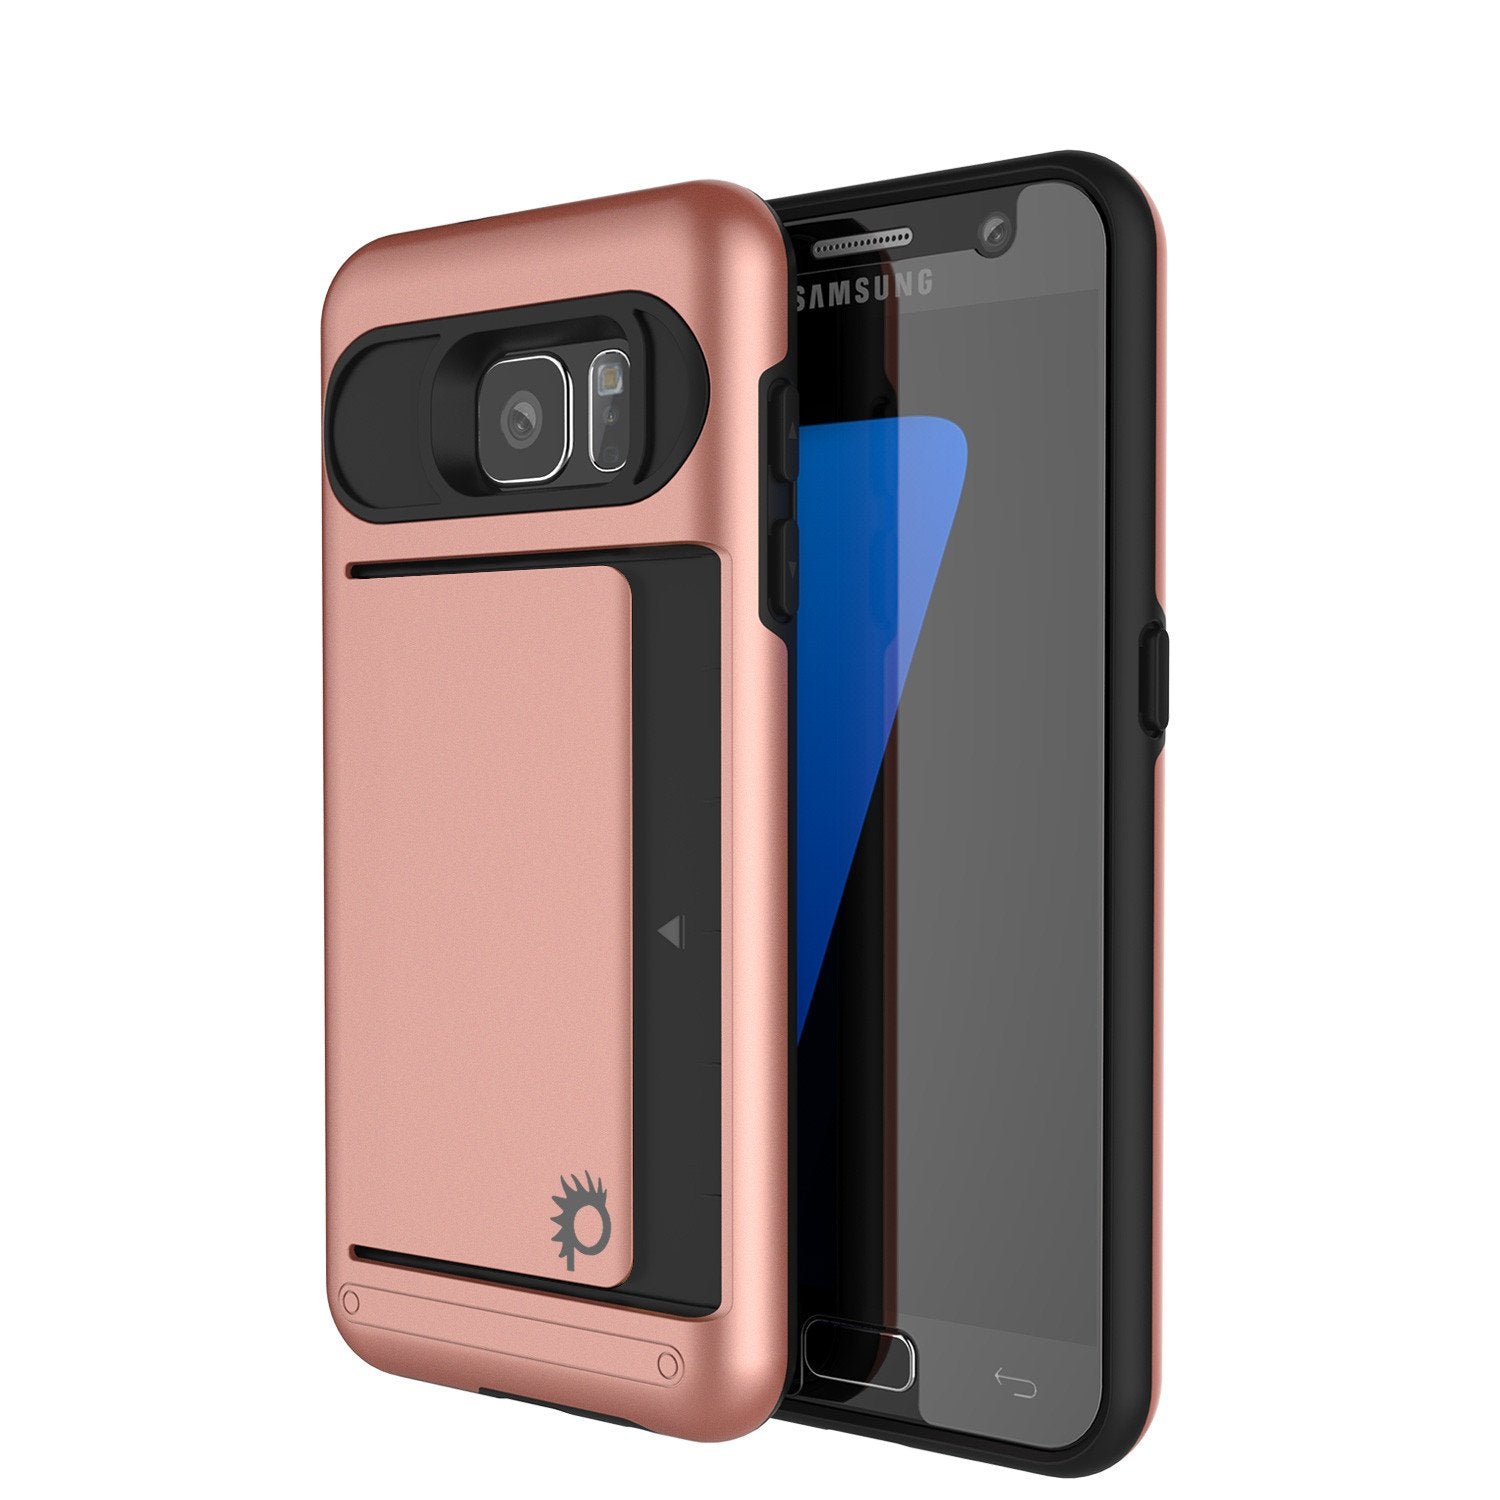 Galaxy S7 EDGE Case PunkCase CLUTCH Rose Gold Series Slim Armor Soft Cover Case w/ Screen Protector